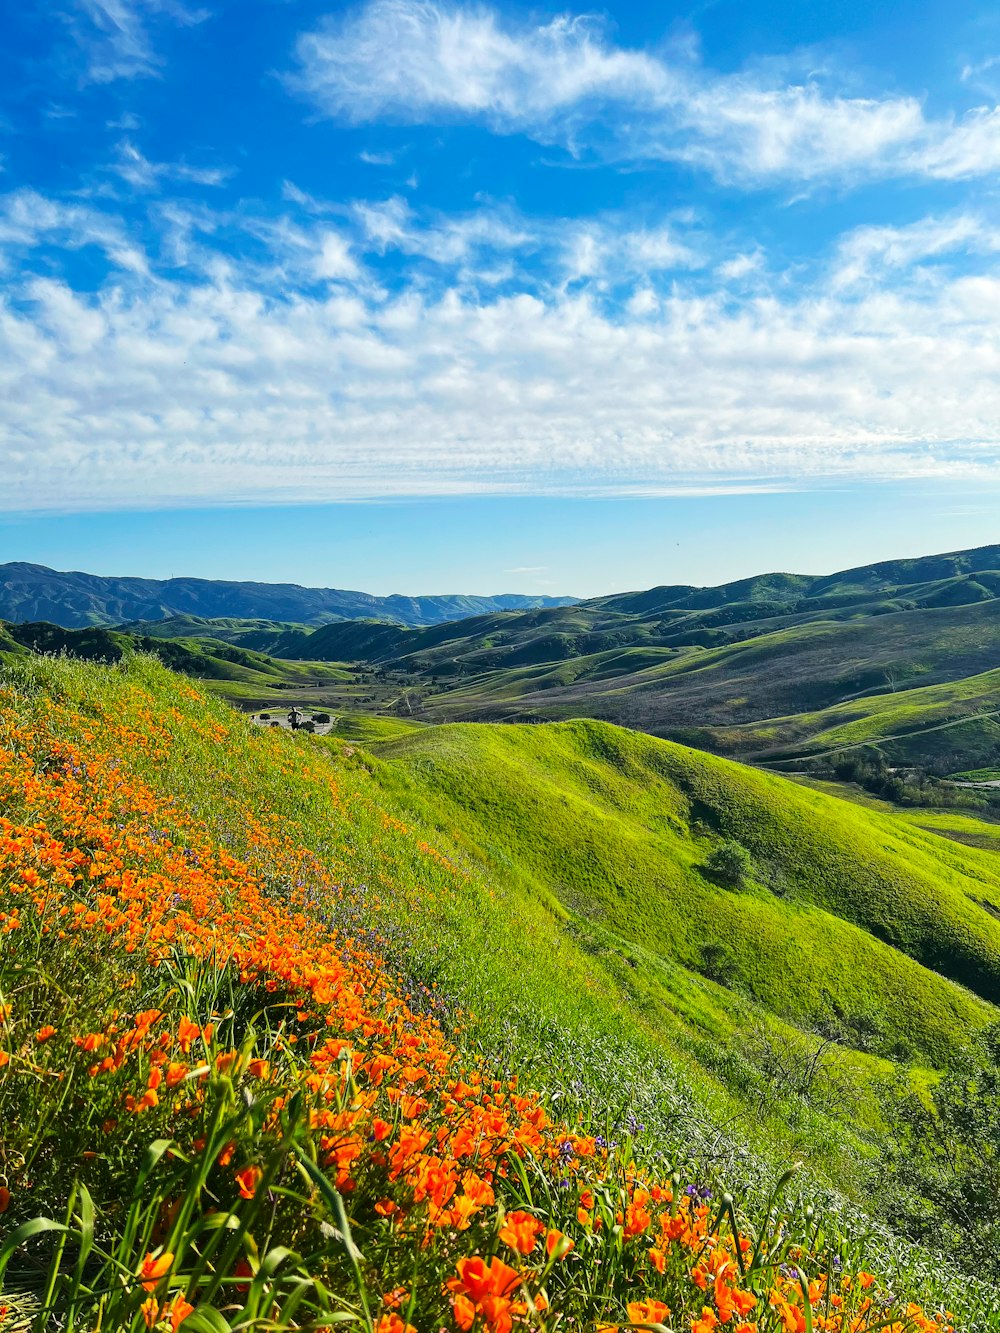 a field of flowers on a hillside with mountains in the background